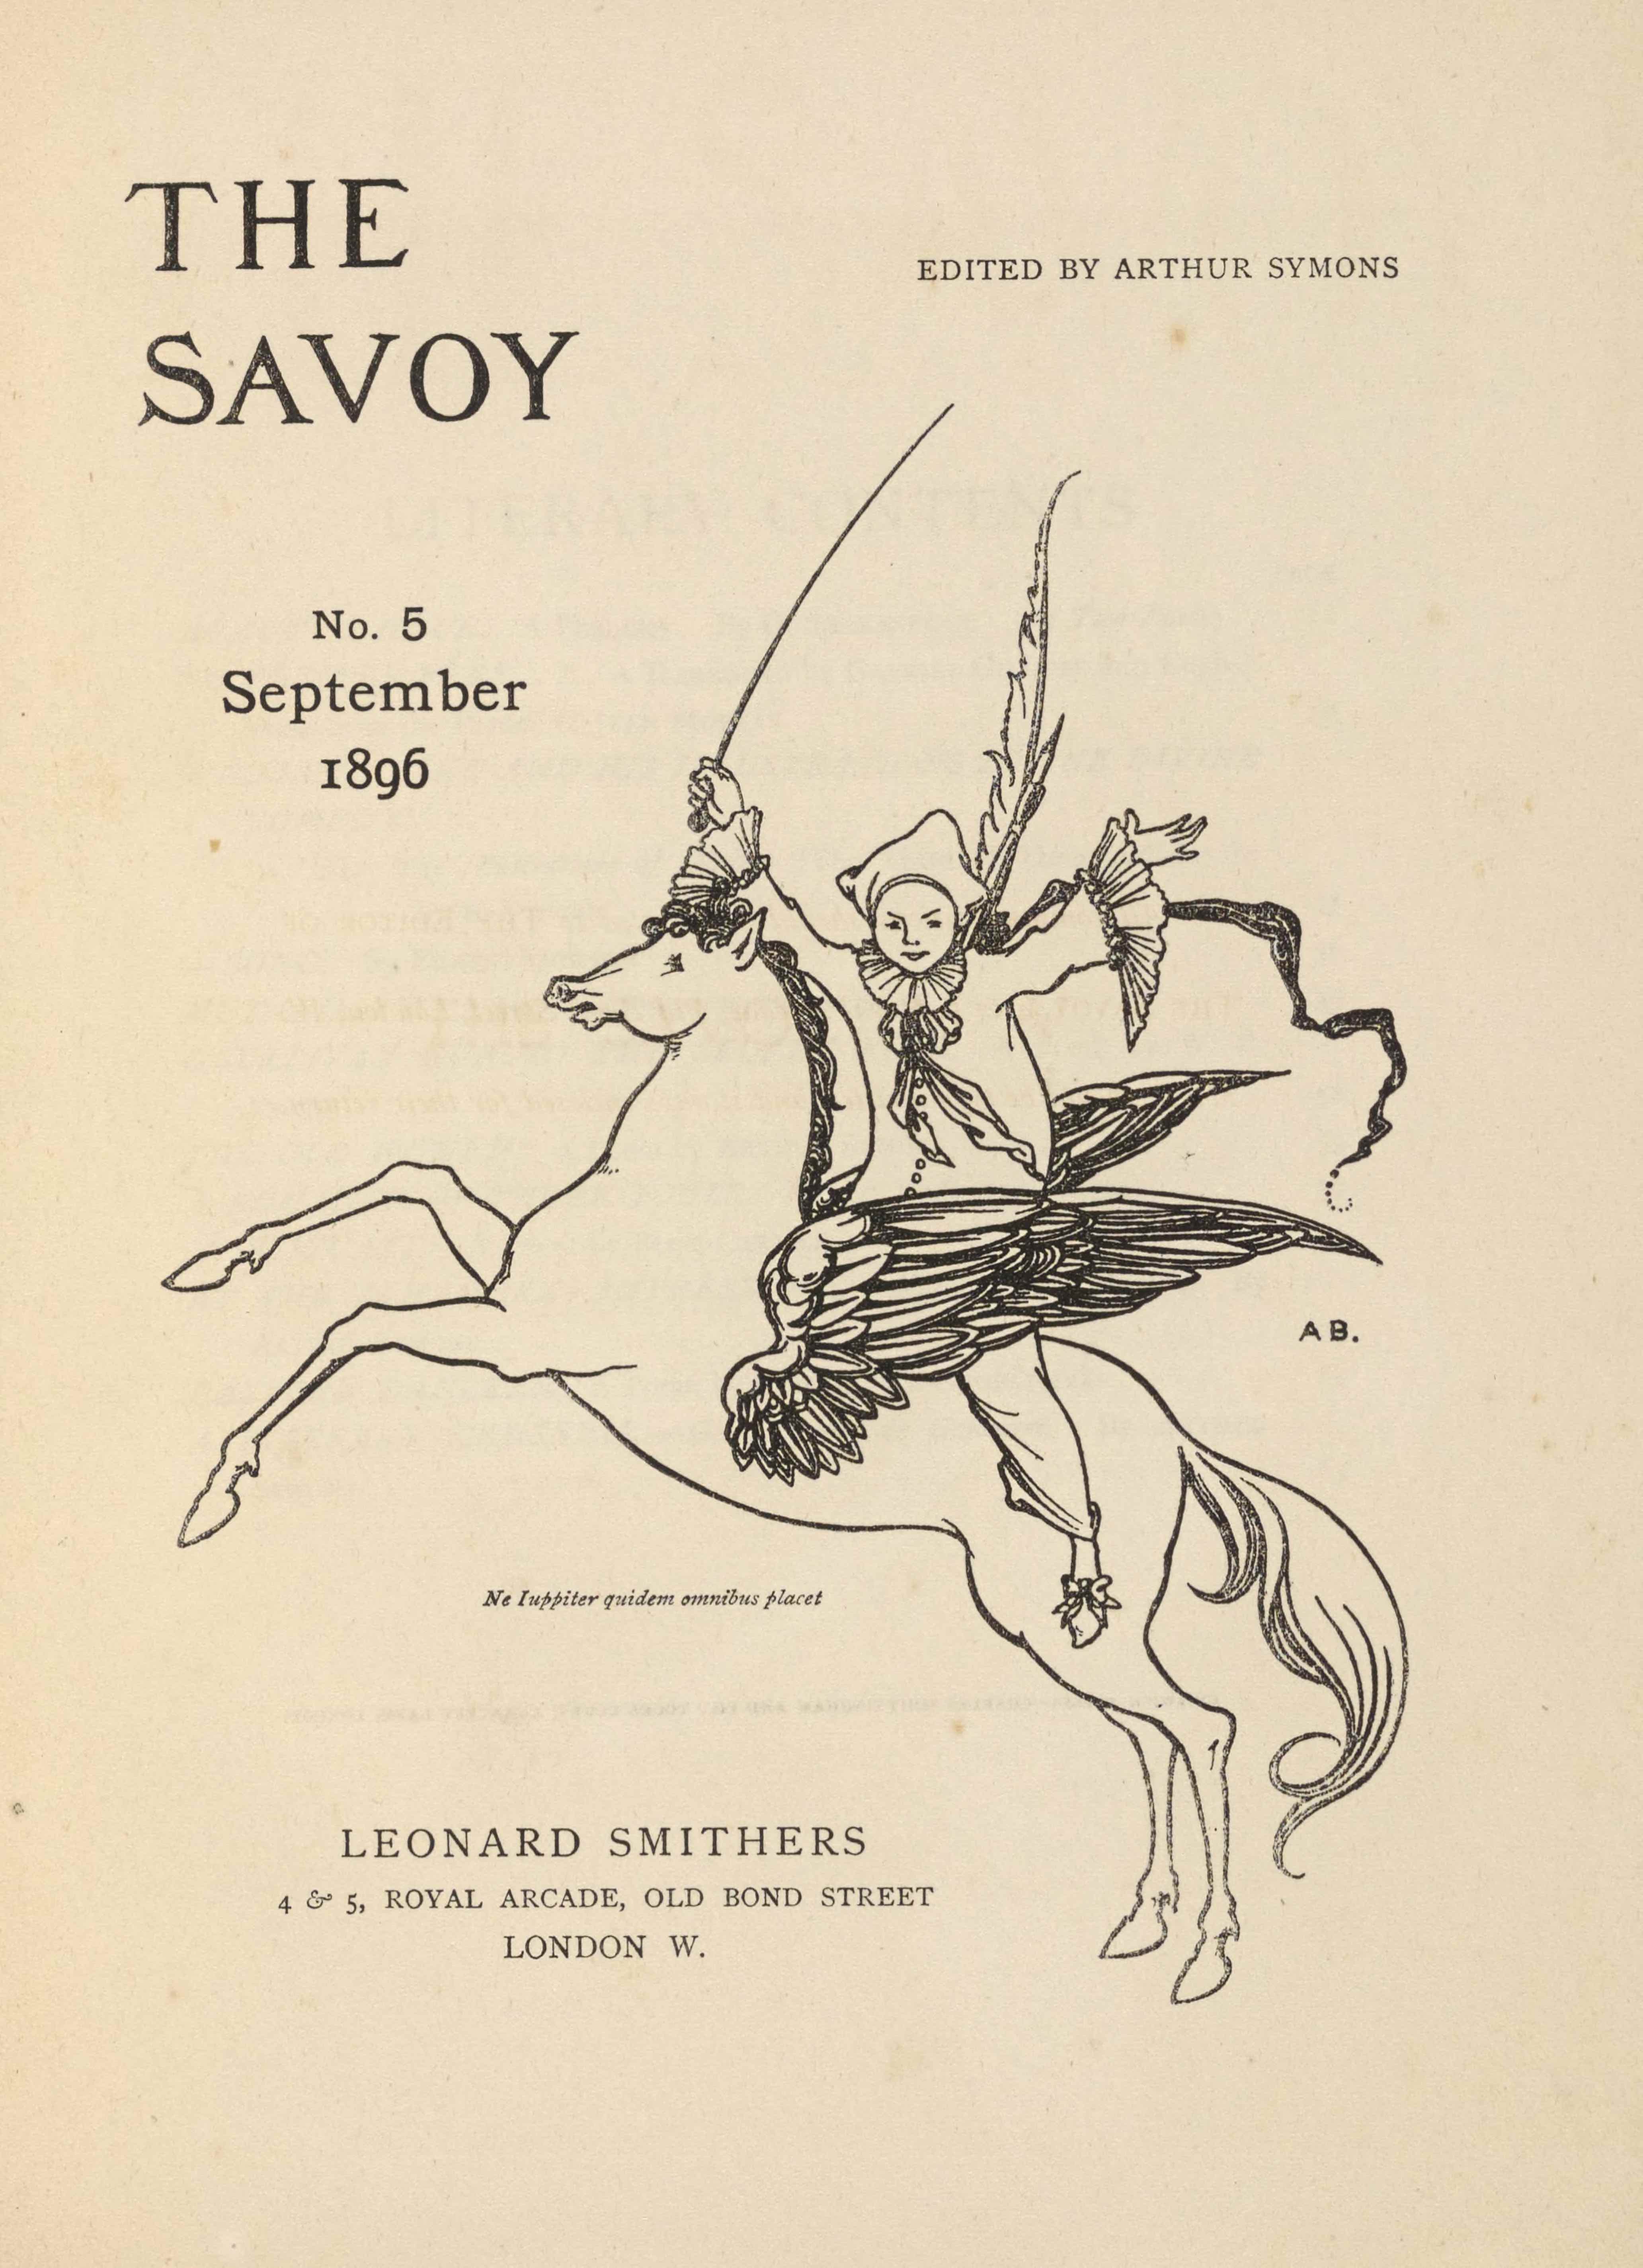 The unframed title page, in portrait orientation, combines a line-block reproduction of a pen-and-ink design with letterpress. The image shows one figure [a Pierrot] riding a winged horse [a Pegasus] in the centre of the page with publishing information printed in the surrounding area. In the upper left corner is the text: “THE” [large caps] and one line below the text: “SAVOY” [large caps]. These two lines of text are left-aligned and indicate the title: “THE SAVOY” [caps]. To the right side of the page and appearing in line with the centre of the title text is the editing information: “EDITED BY ARTHUR SYMONS” [small caps]. Below the title on the left side of the page, still in about the top third, is the text: “No. 3”, and below that the text: “July”, and below that line: “1896”. These three lines are centered with each other. To the right of this text is the image of the figure on the horse. The horse and figure are facing towards the left; the horse is in profile and the figure is turned to face the viewer. The horse is rearing, with both front legs lifted up into the air. The horse spans the width of the page and is about half of the page height. The horse has a long tail trailing behind. The horse’s mouth is slightly opened and the pointed ears are pulled back. The mane is curled and a few pieces fall forwards toward the eyes. The horse has large wings emerging from the sides of its ribcage. The wings are made up of many feathers of various sizes and are formed like eagle wings, with a smaller section on the bottom half and a larger pointed portion of wing on the top half. Between the wings sits a male figure dressed like a Pierrot or clown. The figure has his upper body turned to face the viewer, with both arms opened wide and lifted up into the air. He is wearing slippers with a bow on the toe, baggy pants that fall just above the ankle, and a baggy shirt that has buttons up the front. The shirt has large ruffles on the sleeve hems and a large ruffle around the figure’s neck, finished with a ruff and flowing, loosely tied bow. He is wearing a white three-cornered hat. The figure has a long whip in his right hand that extends high above him. A feather pen and paint brush extend over his shoulder behind his back, and a banner or pennant flows behind him. To the right of the centre of the horse and figure, just below the right wing tip, is the small text: “A B.” [caps]. A Latin epigraph appears just below the belly of the horse, very small and italicized, which reads: “Ne luppiter quidem omnibus placet” [Not even Jupiter can please everyone]. Centered below are the three final lines of text. The first line, and largest sized text of the three, reads: “LEONARD SMITHERS” [caps]. The second line reads: “ARUNDEL STREET, STRAND” [caps]. The third and final line centered below is the mid-size between the above two lines, and it reads: “LONDON W.C.” [caps].